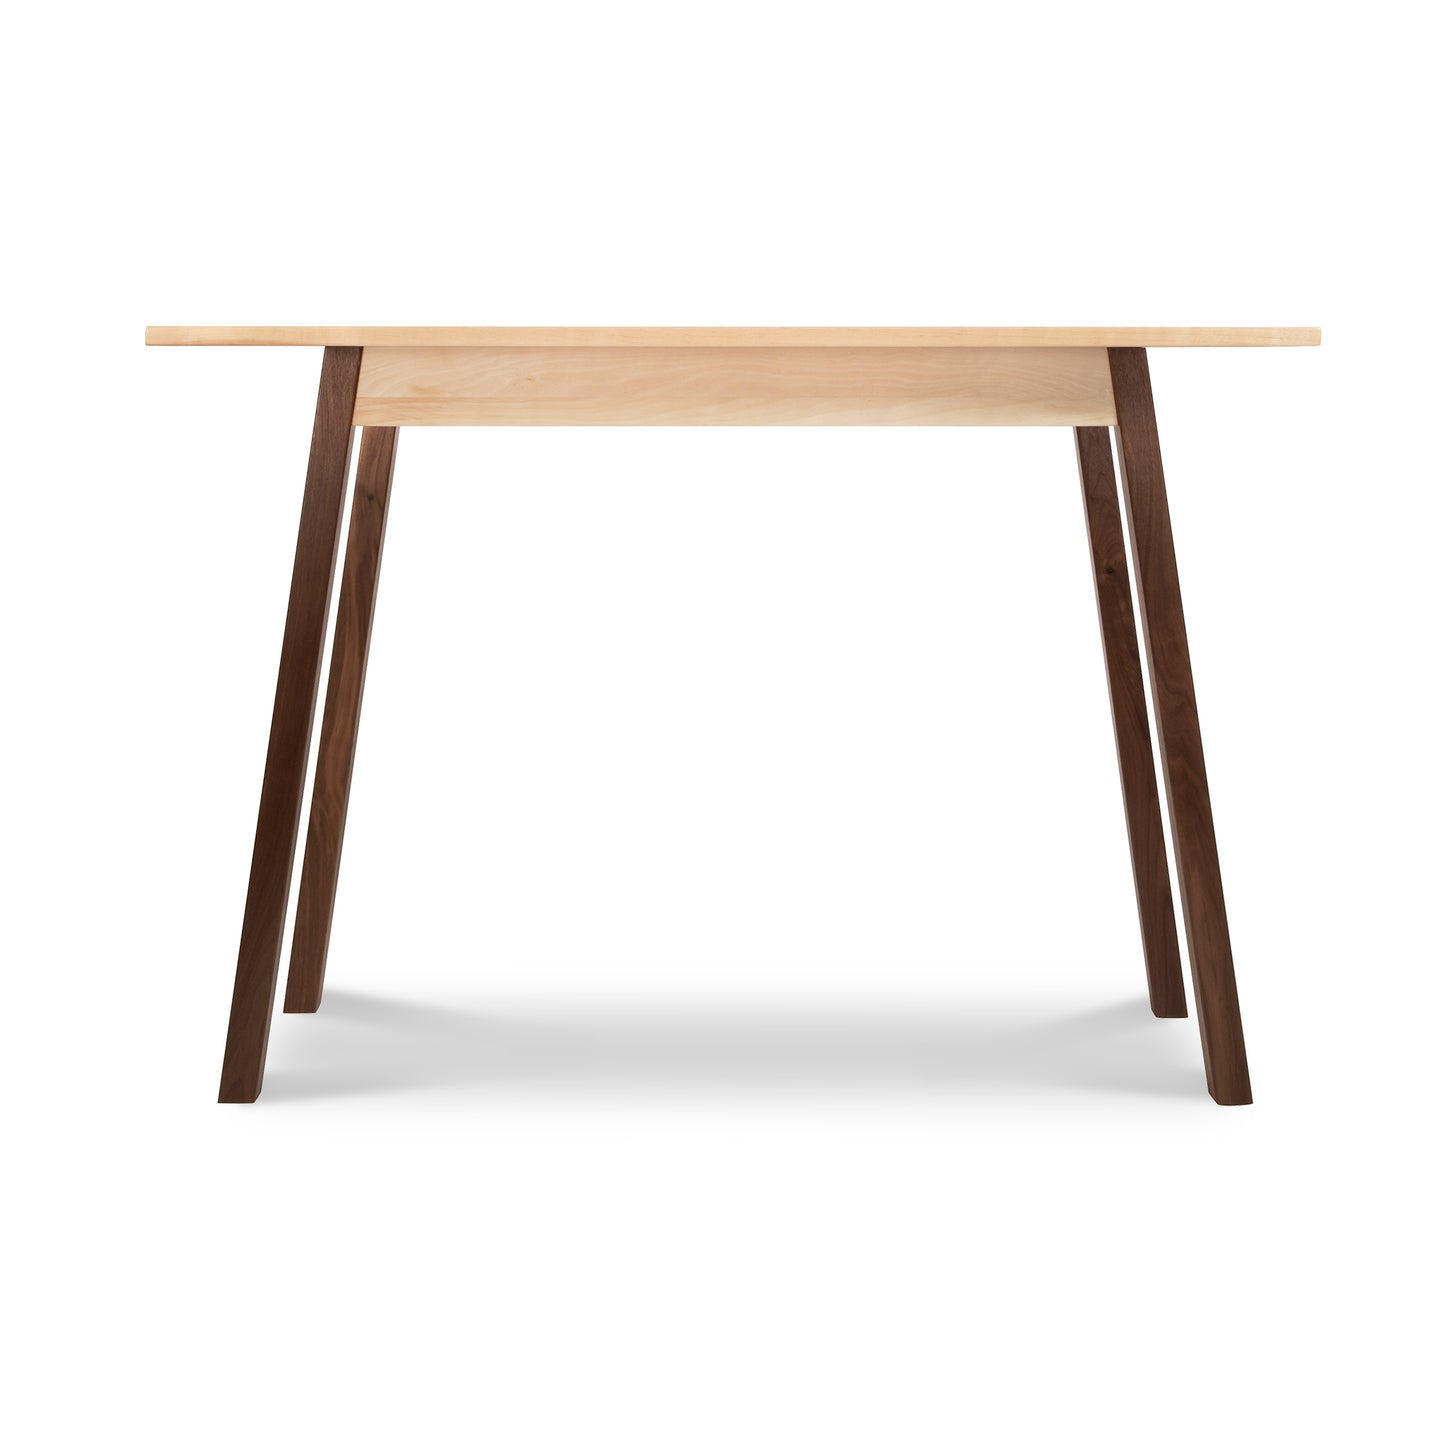 A table with a wooden top and brown legs.